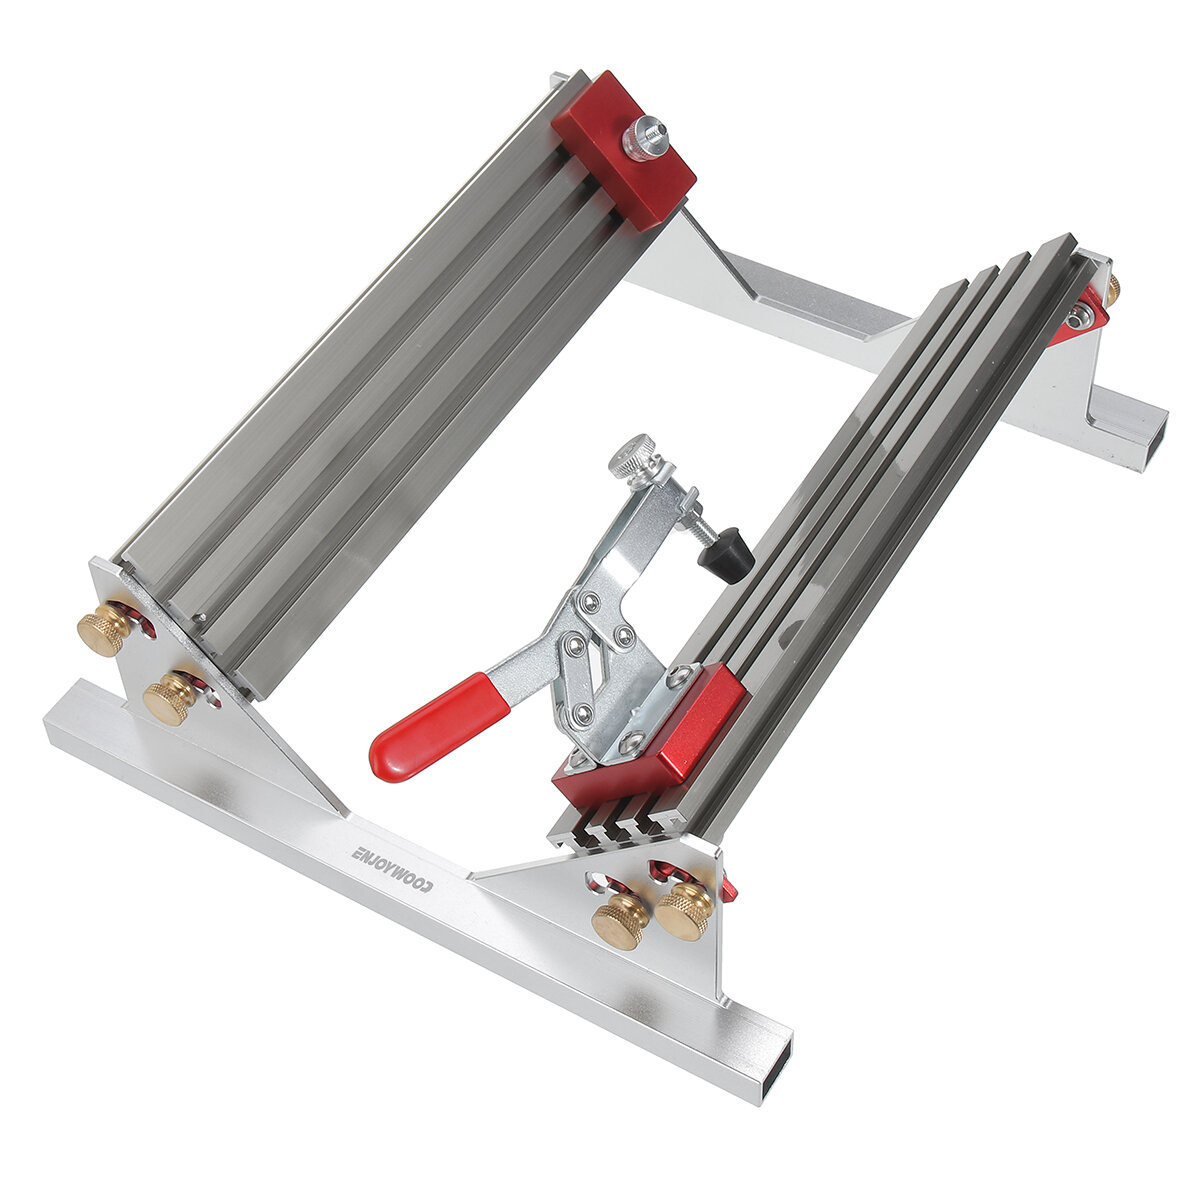 Image of ENJOYWOOD Adjustable Spline Jig for Table Saw & Router Table Silver Aluminum Alloy Material 1/2in-16in Project Size Comp